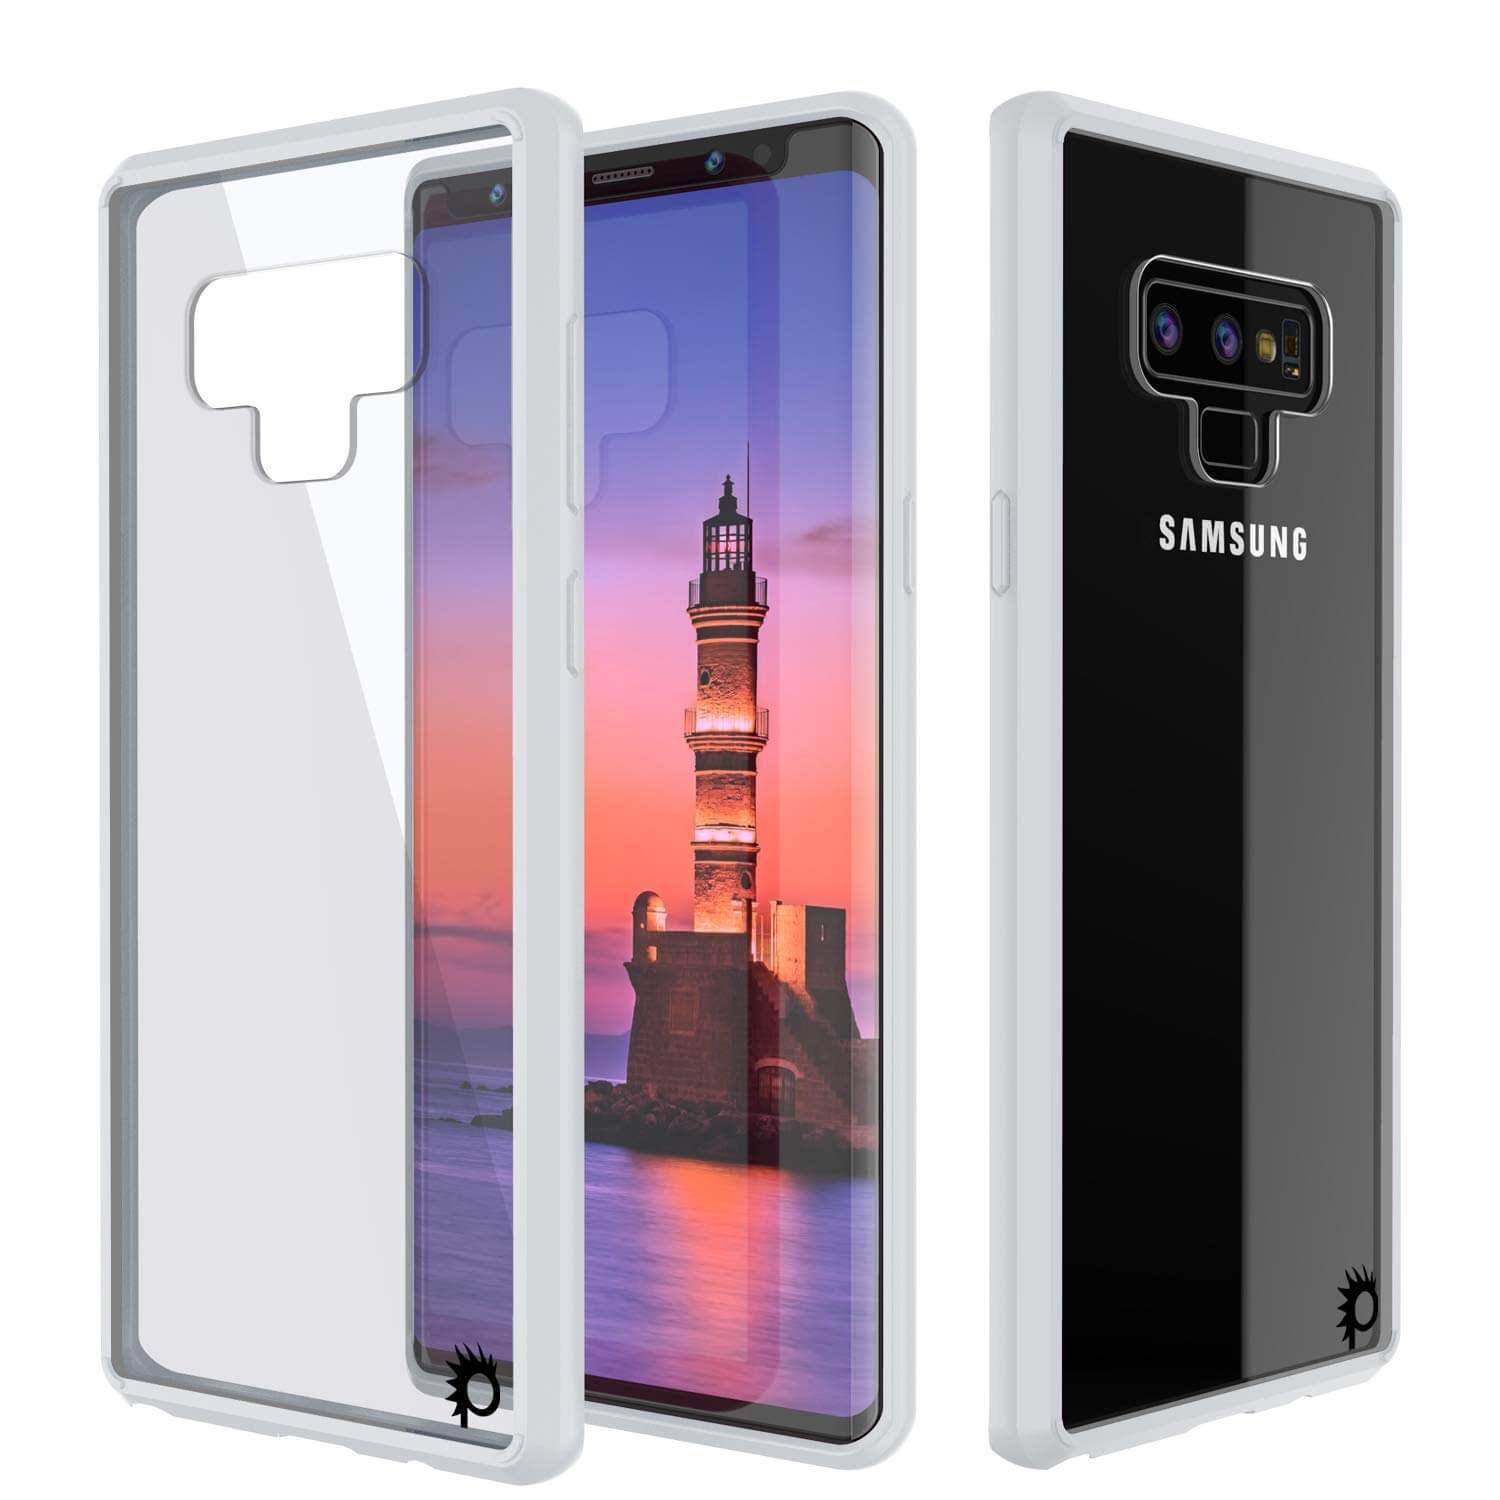 Galaxy Note 9 Case, PUNKcase [LUCID 2.0 Series] [Slim Fit] Armor Cover W/Integrated Anti-Shock System [White] - PunkCase NZ